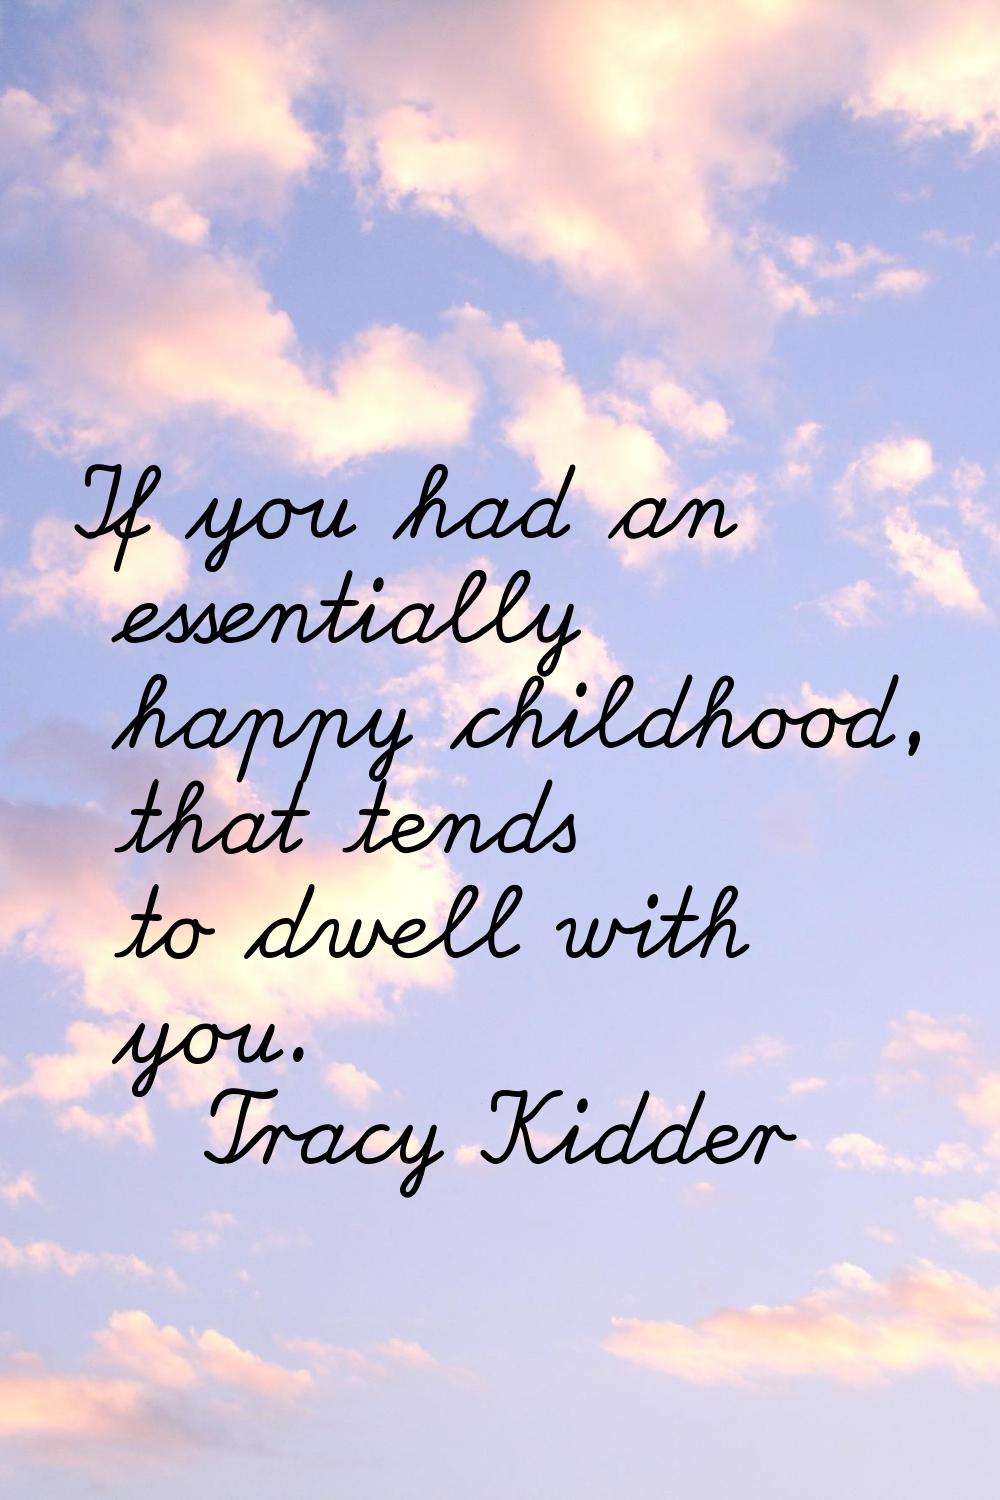 If you had an essentially happy childhood, that tends to dwell with you.